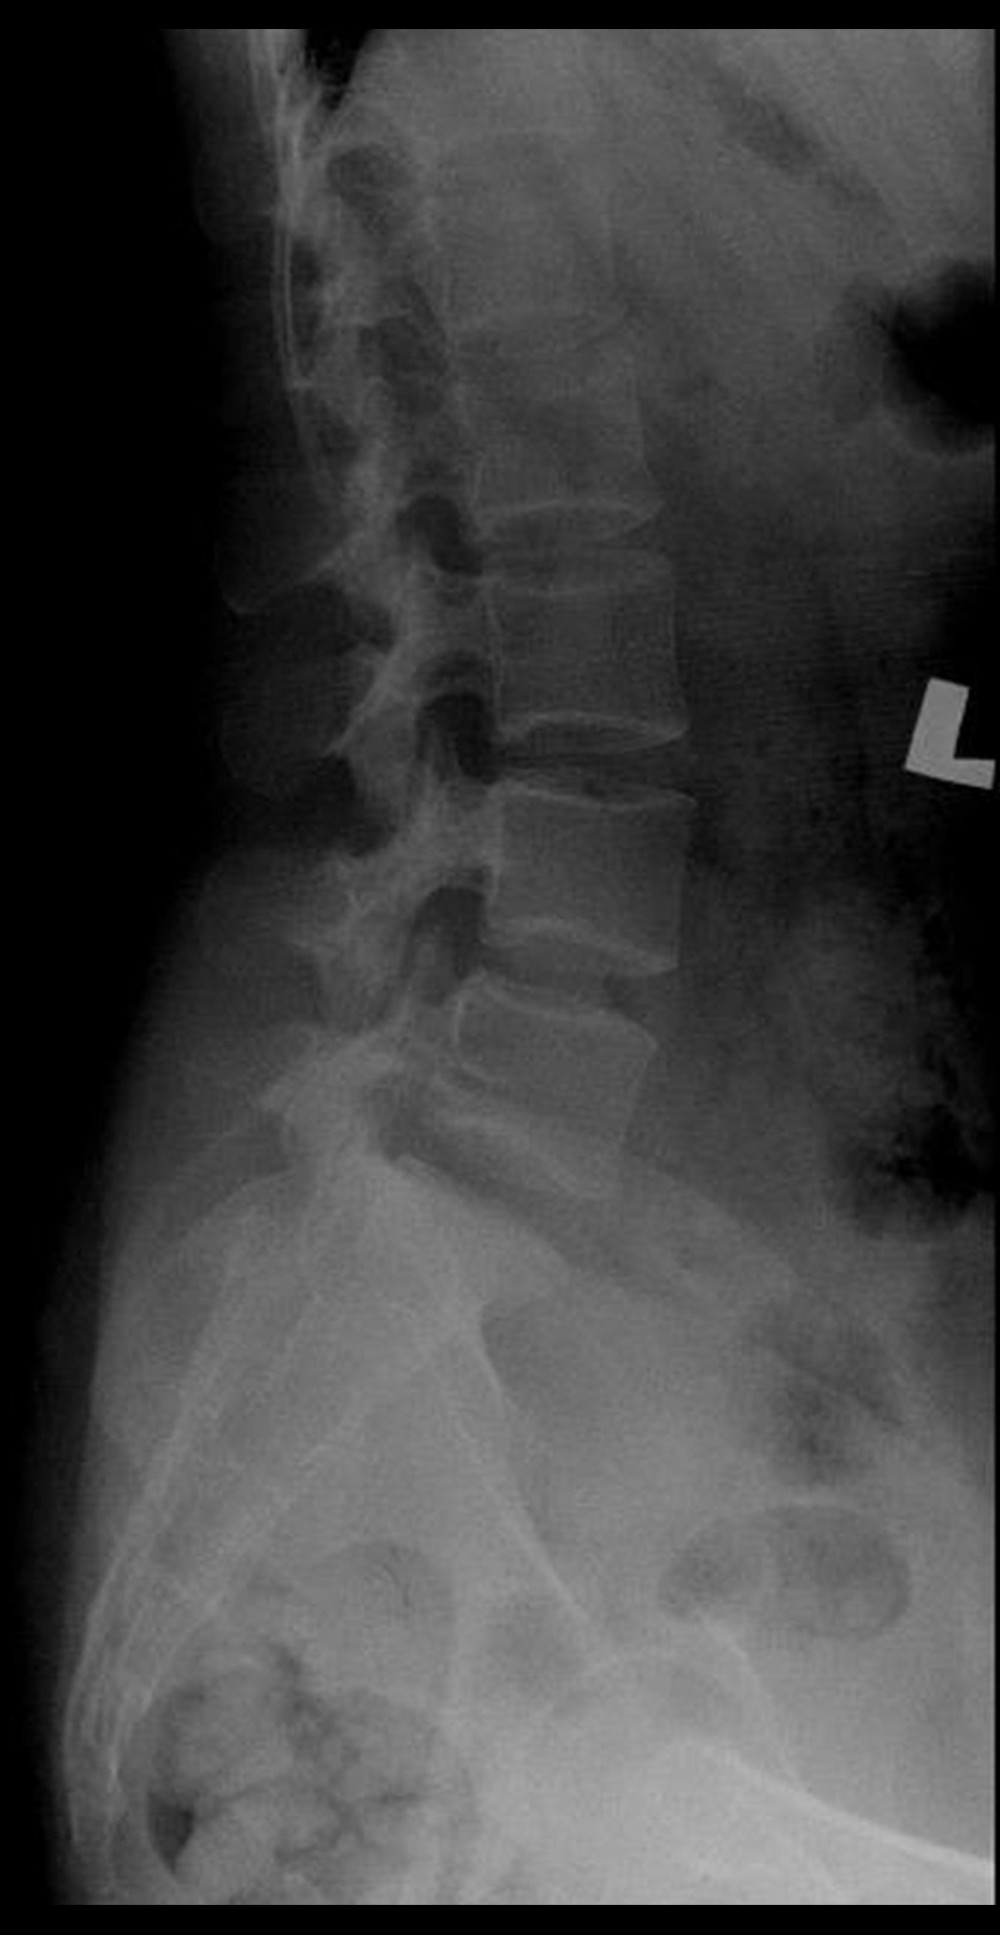 Lateral view of the lumbosacral plain X-ray.